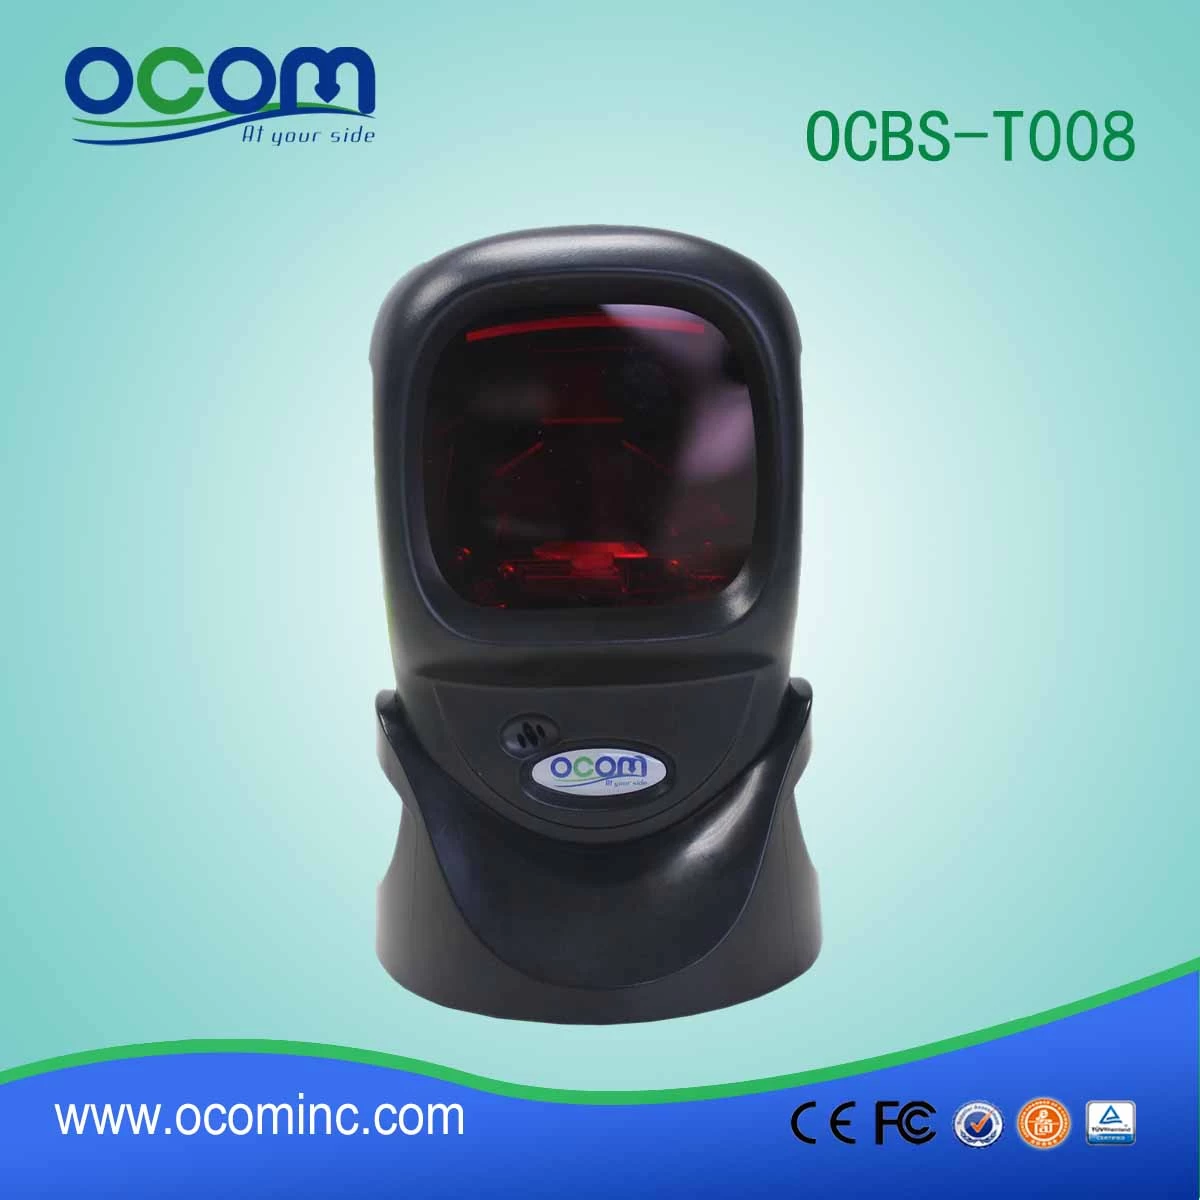 Omni directional desktop usb barcode scanner with long distance